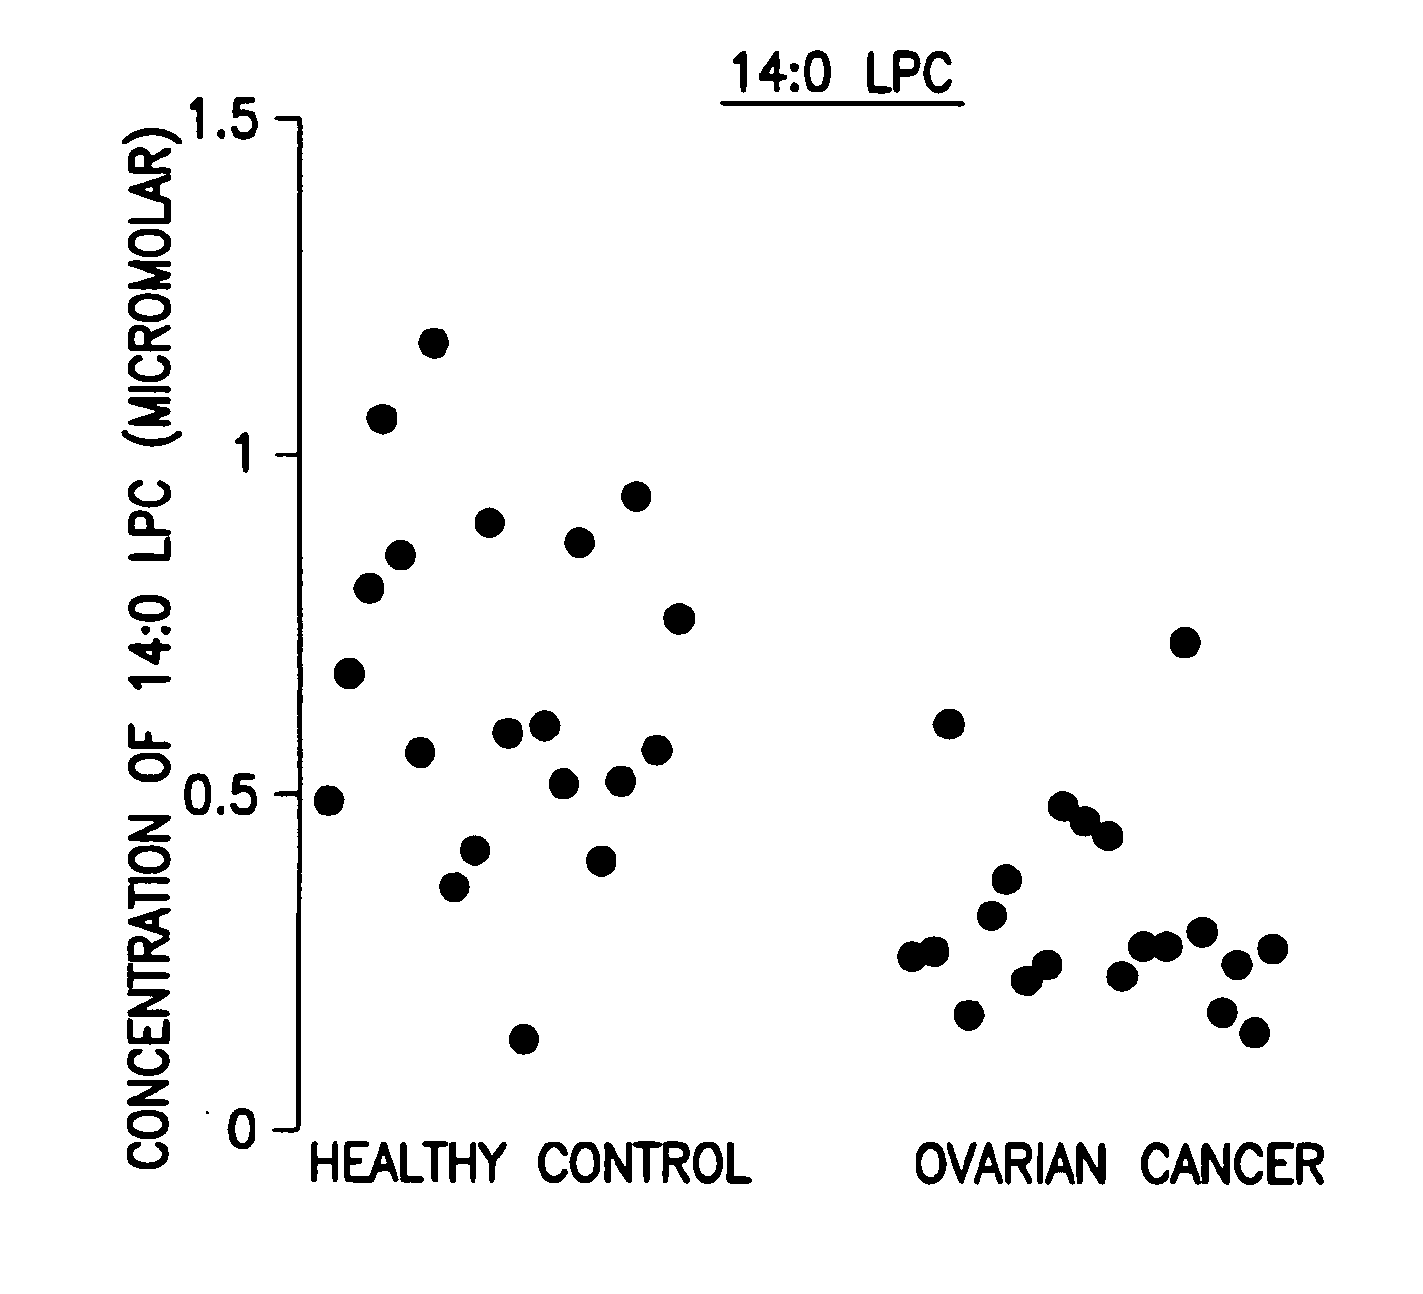 Methods for detecting or monitoring cancer using lpc as a marker